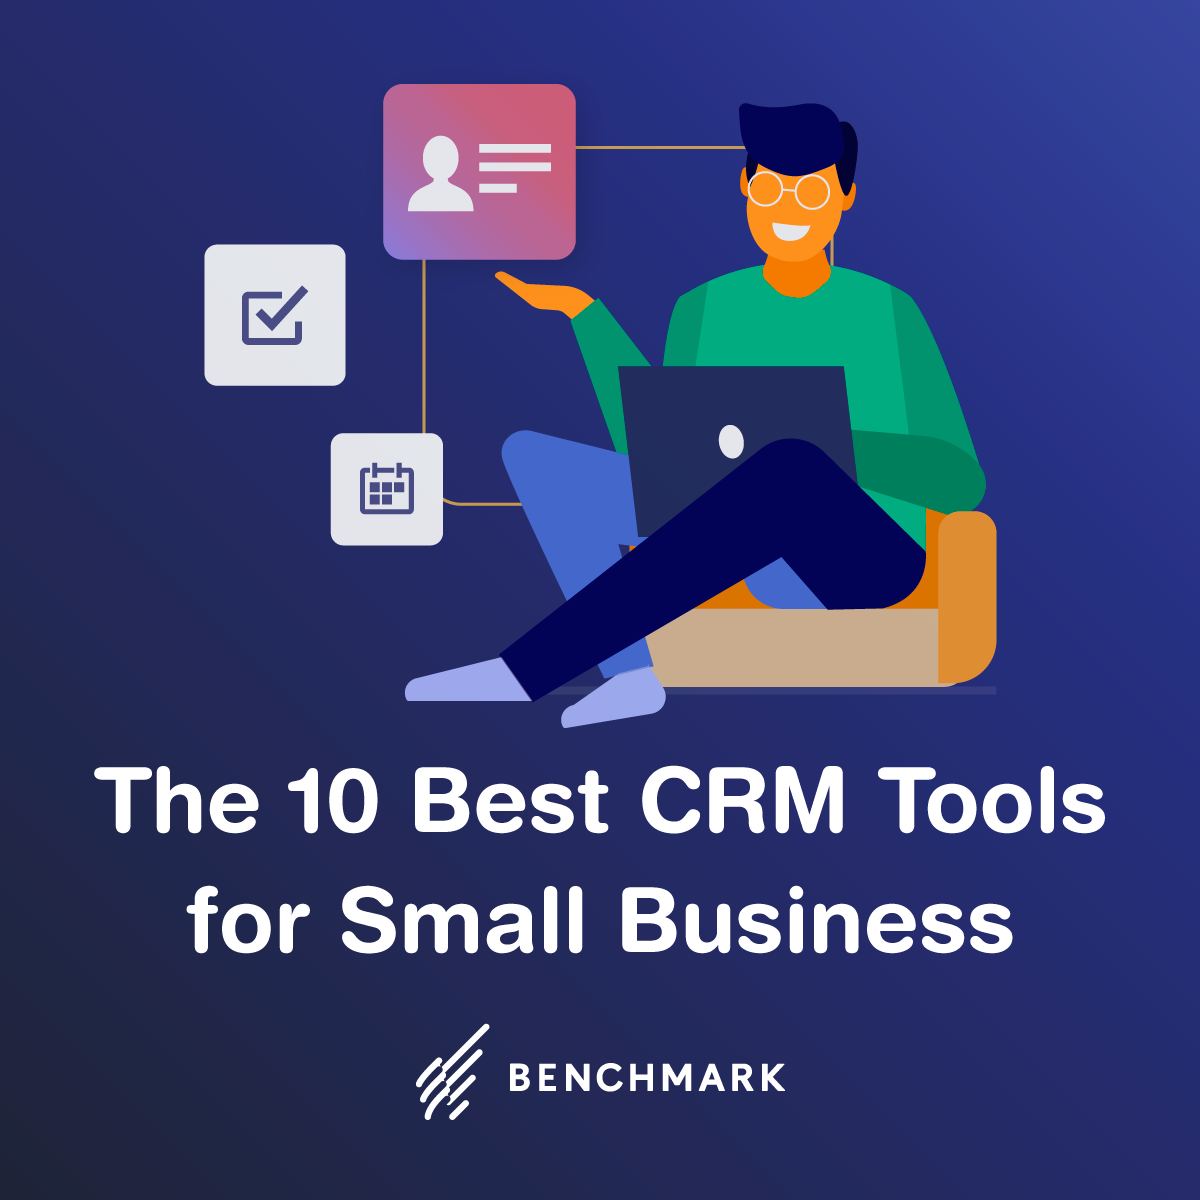 The 10 Best CRM Tools for Small Business